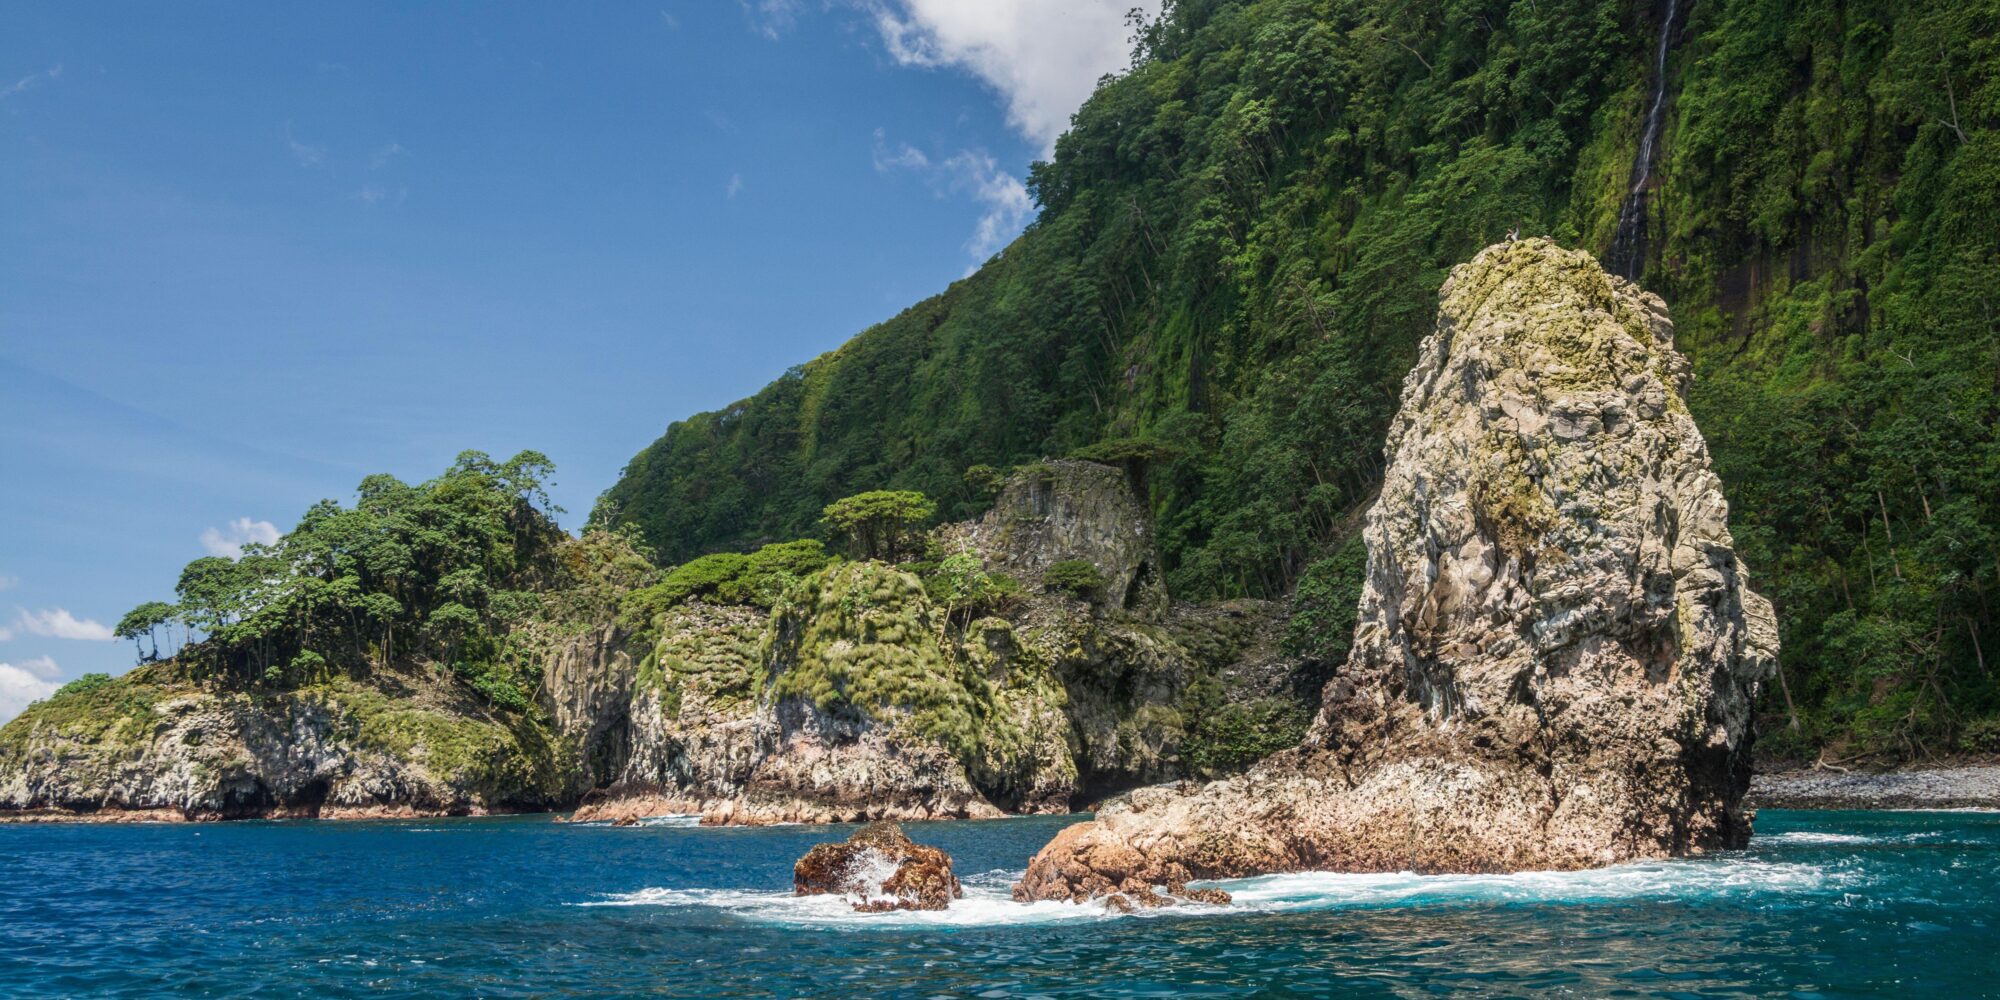 <p>The marine protected area (MPA) around Cocos Island National Park in Costa Rica was expanded in 2021, while the nation announced plans at COP26 to connect its MPAs with those of Colombia, Ecuador and Panama, increasing protection of one of the world&#8217;s richest pockets of biodiversity (Image: Nick Hawkins / Alamy)</p>